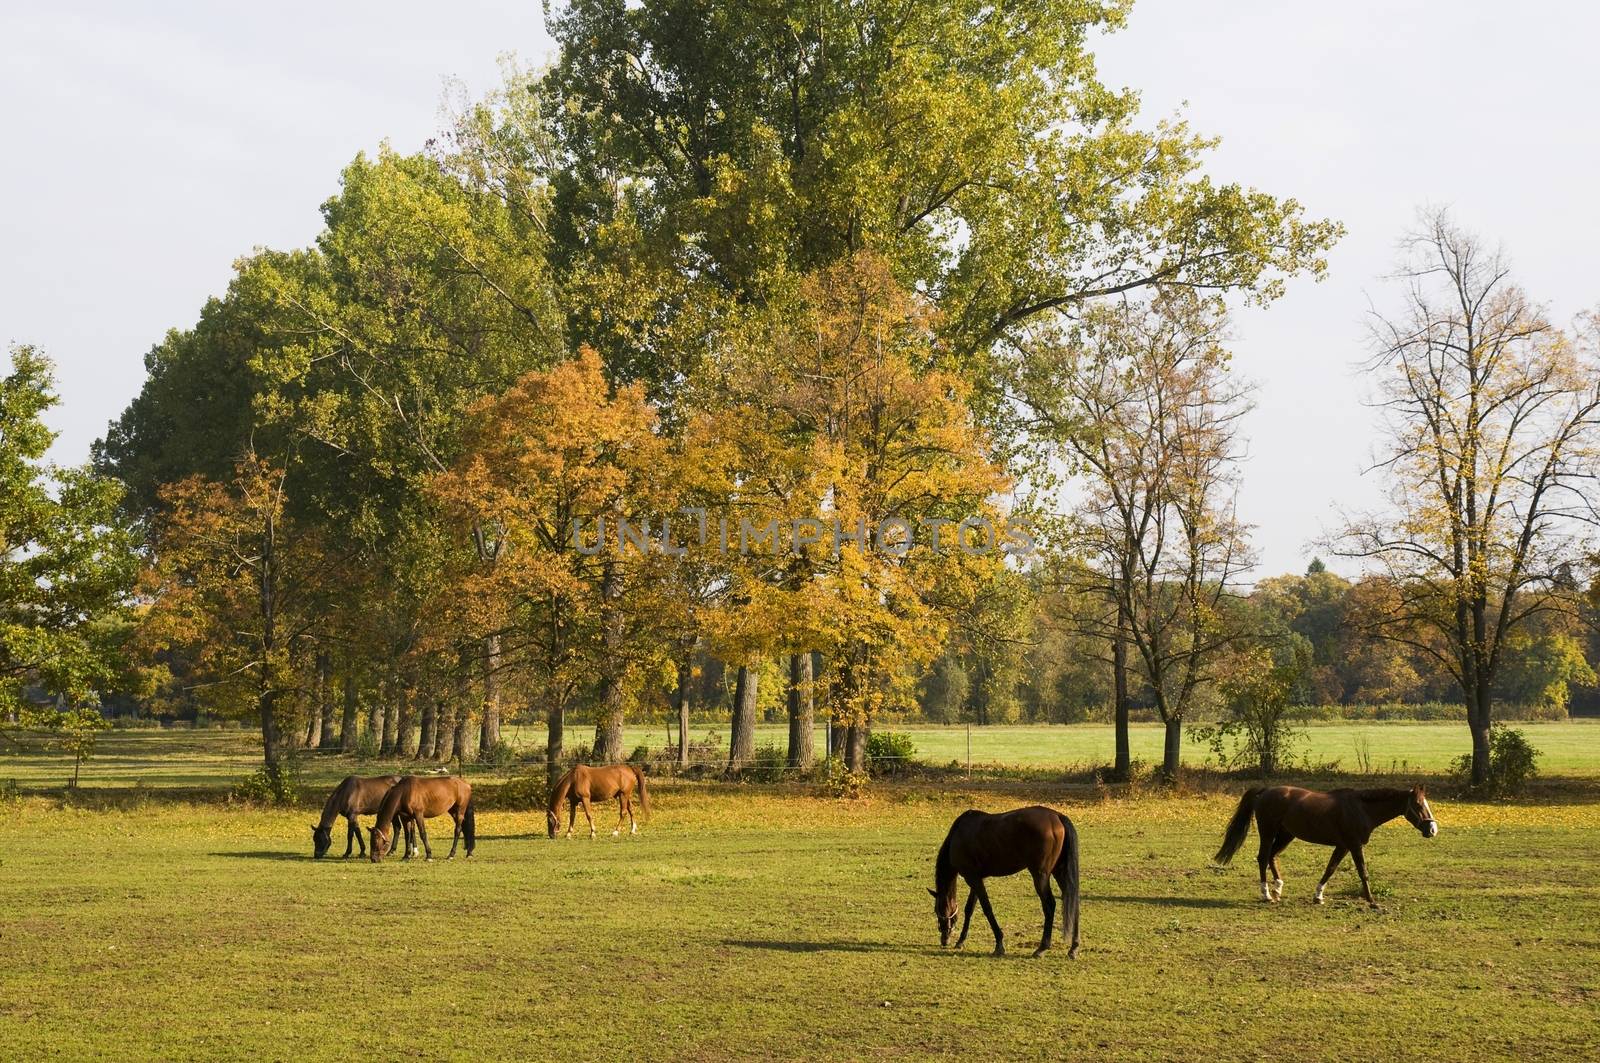 Horses grazing by Digifoodstock